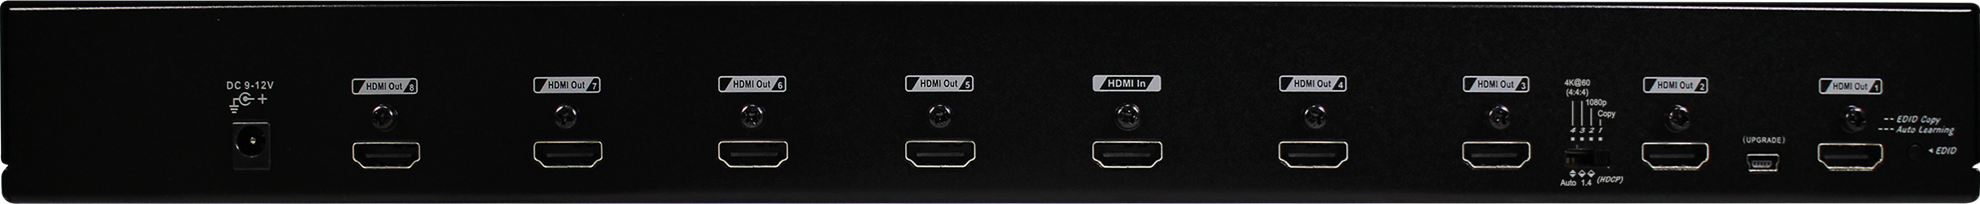 REXTRON 1 in 8 Out HDMI 2.0 Splitter. Supports Ultra-HD Resolution up to 4K@60Hz